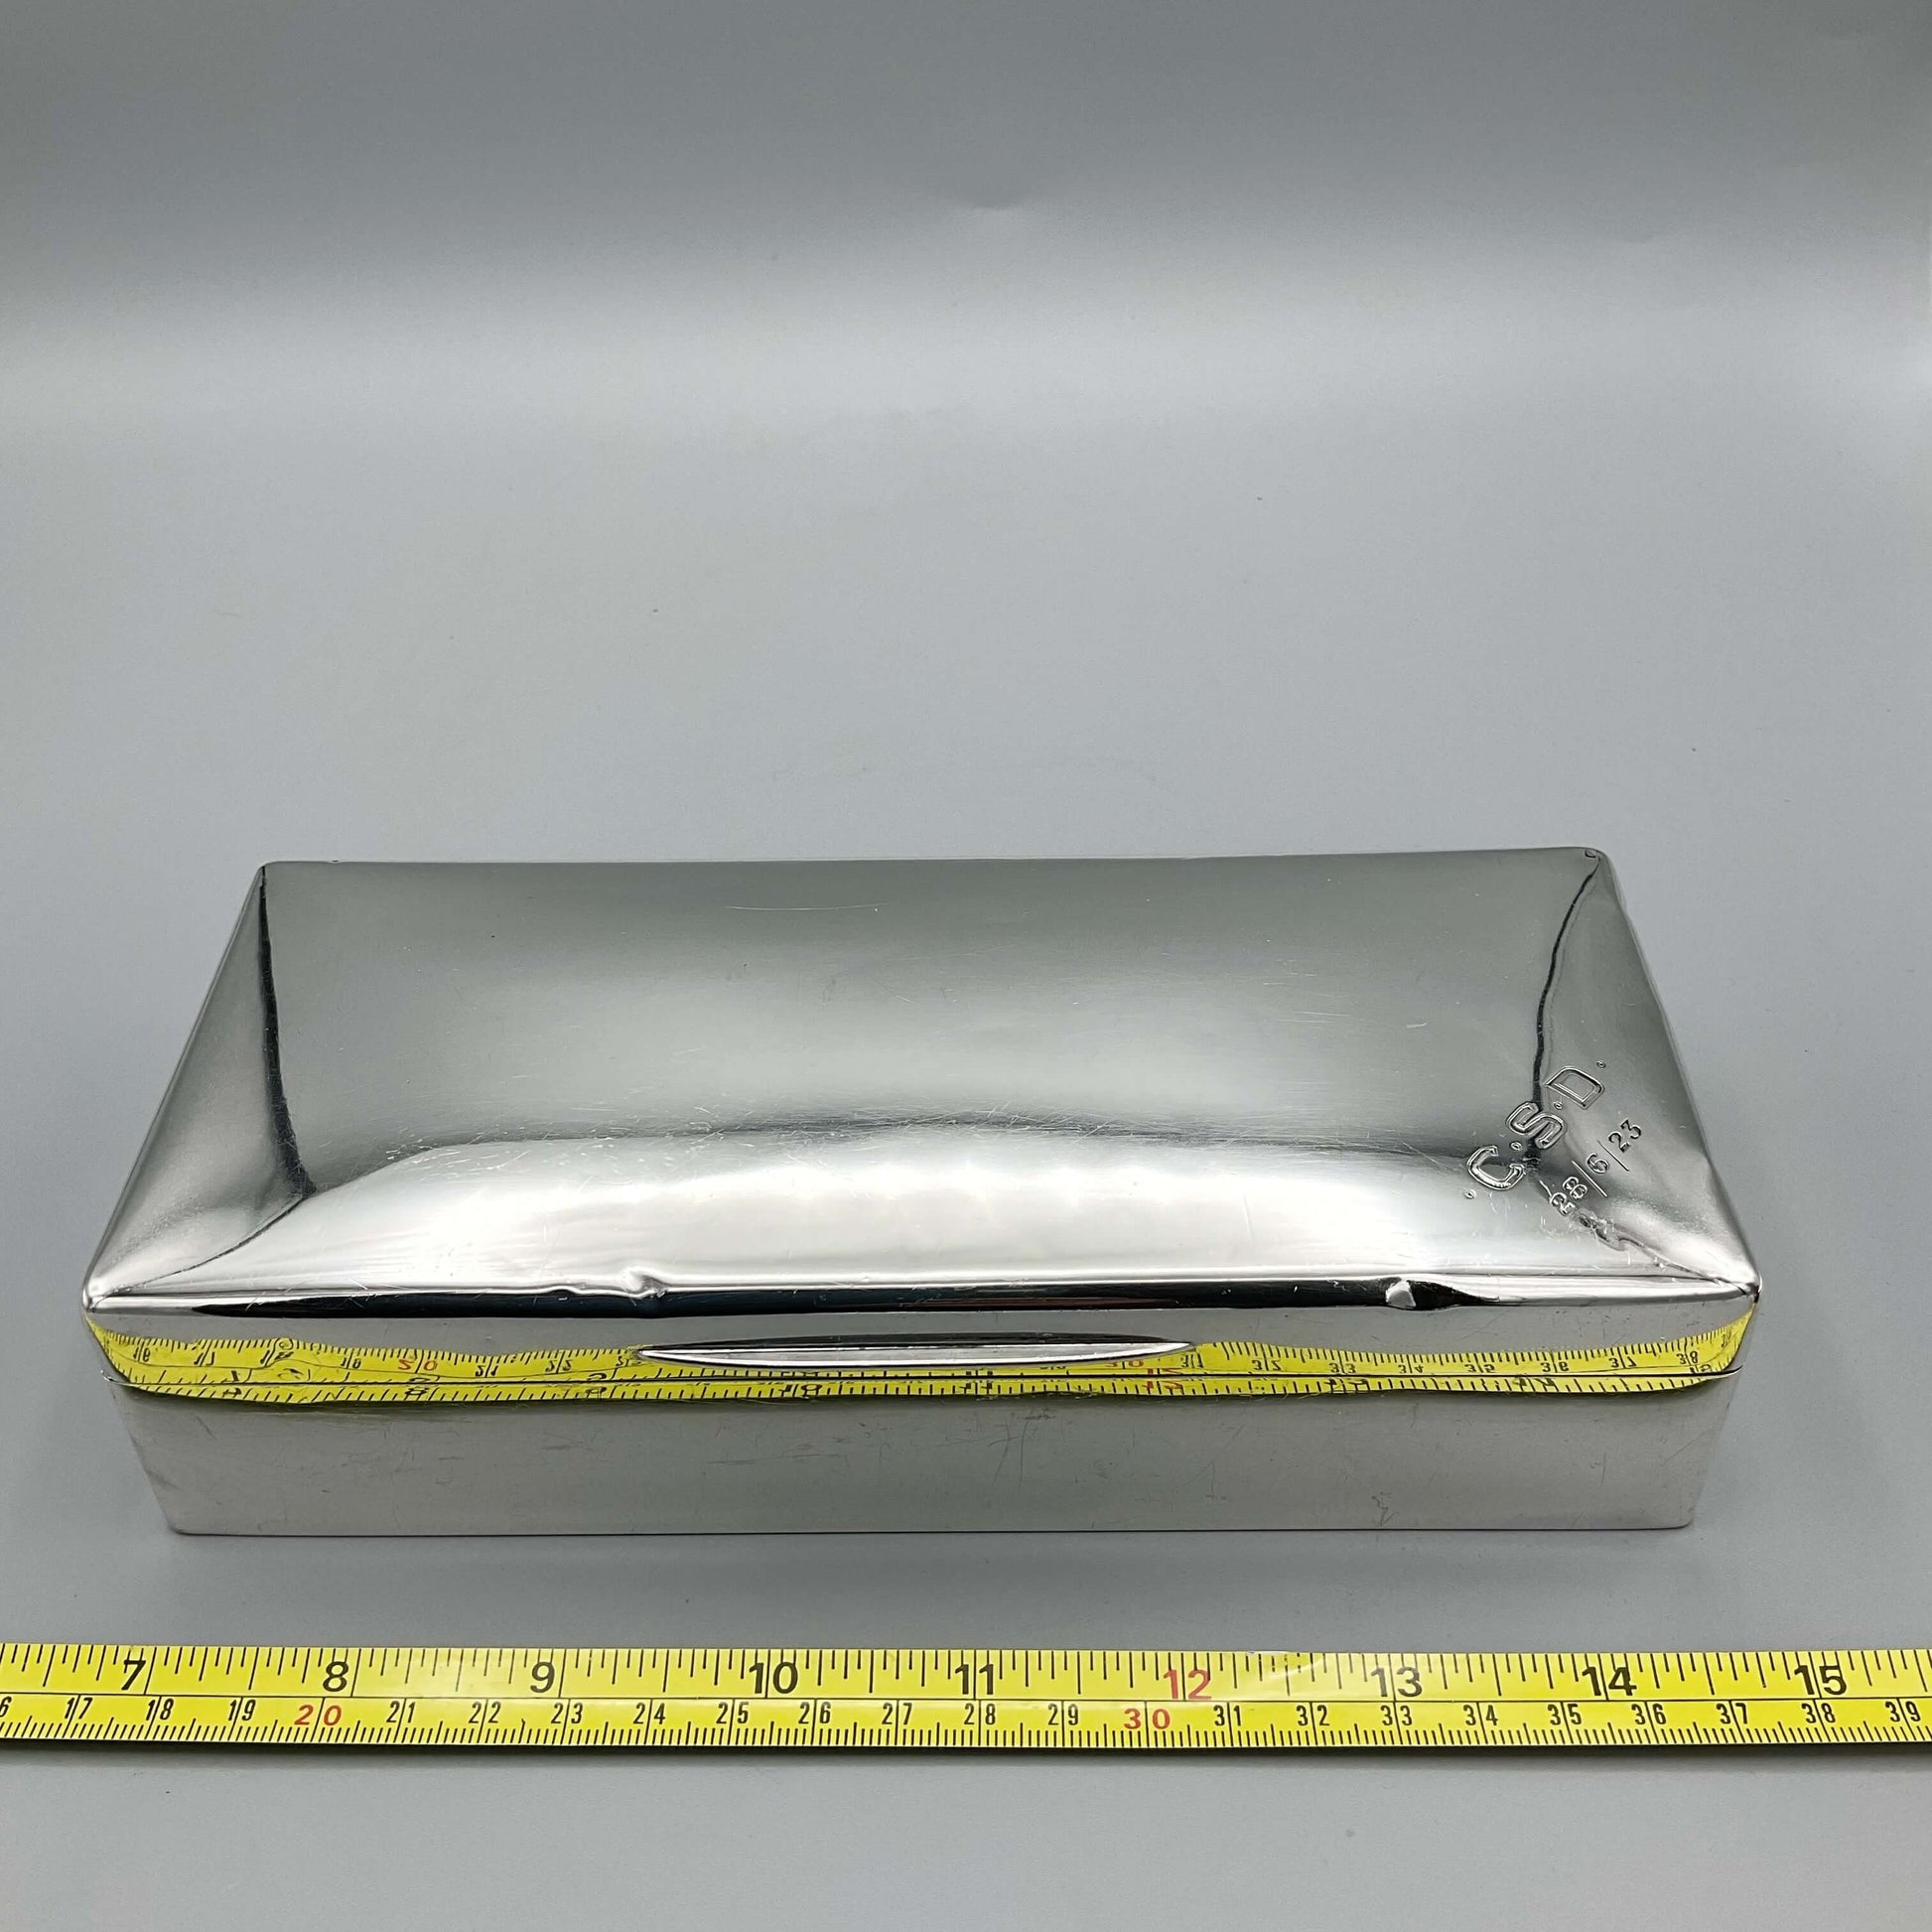 large shiny reflective silver cigarette box next to tape measure showing width as approx 21cm